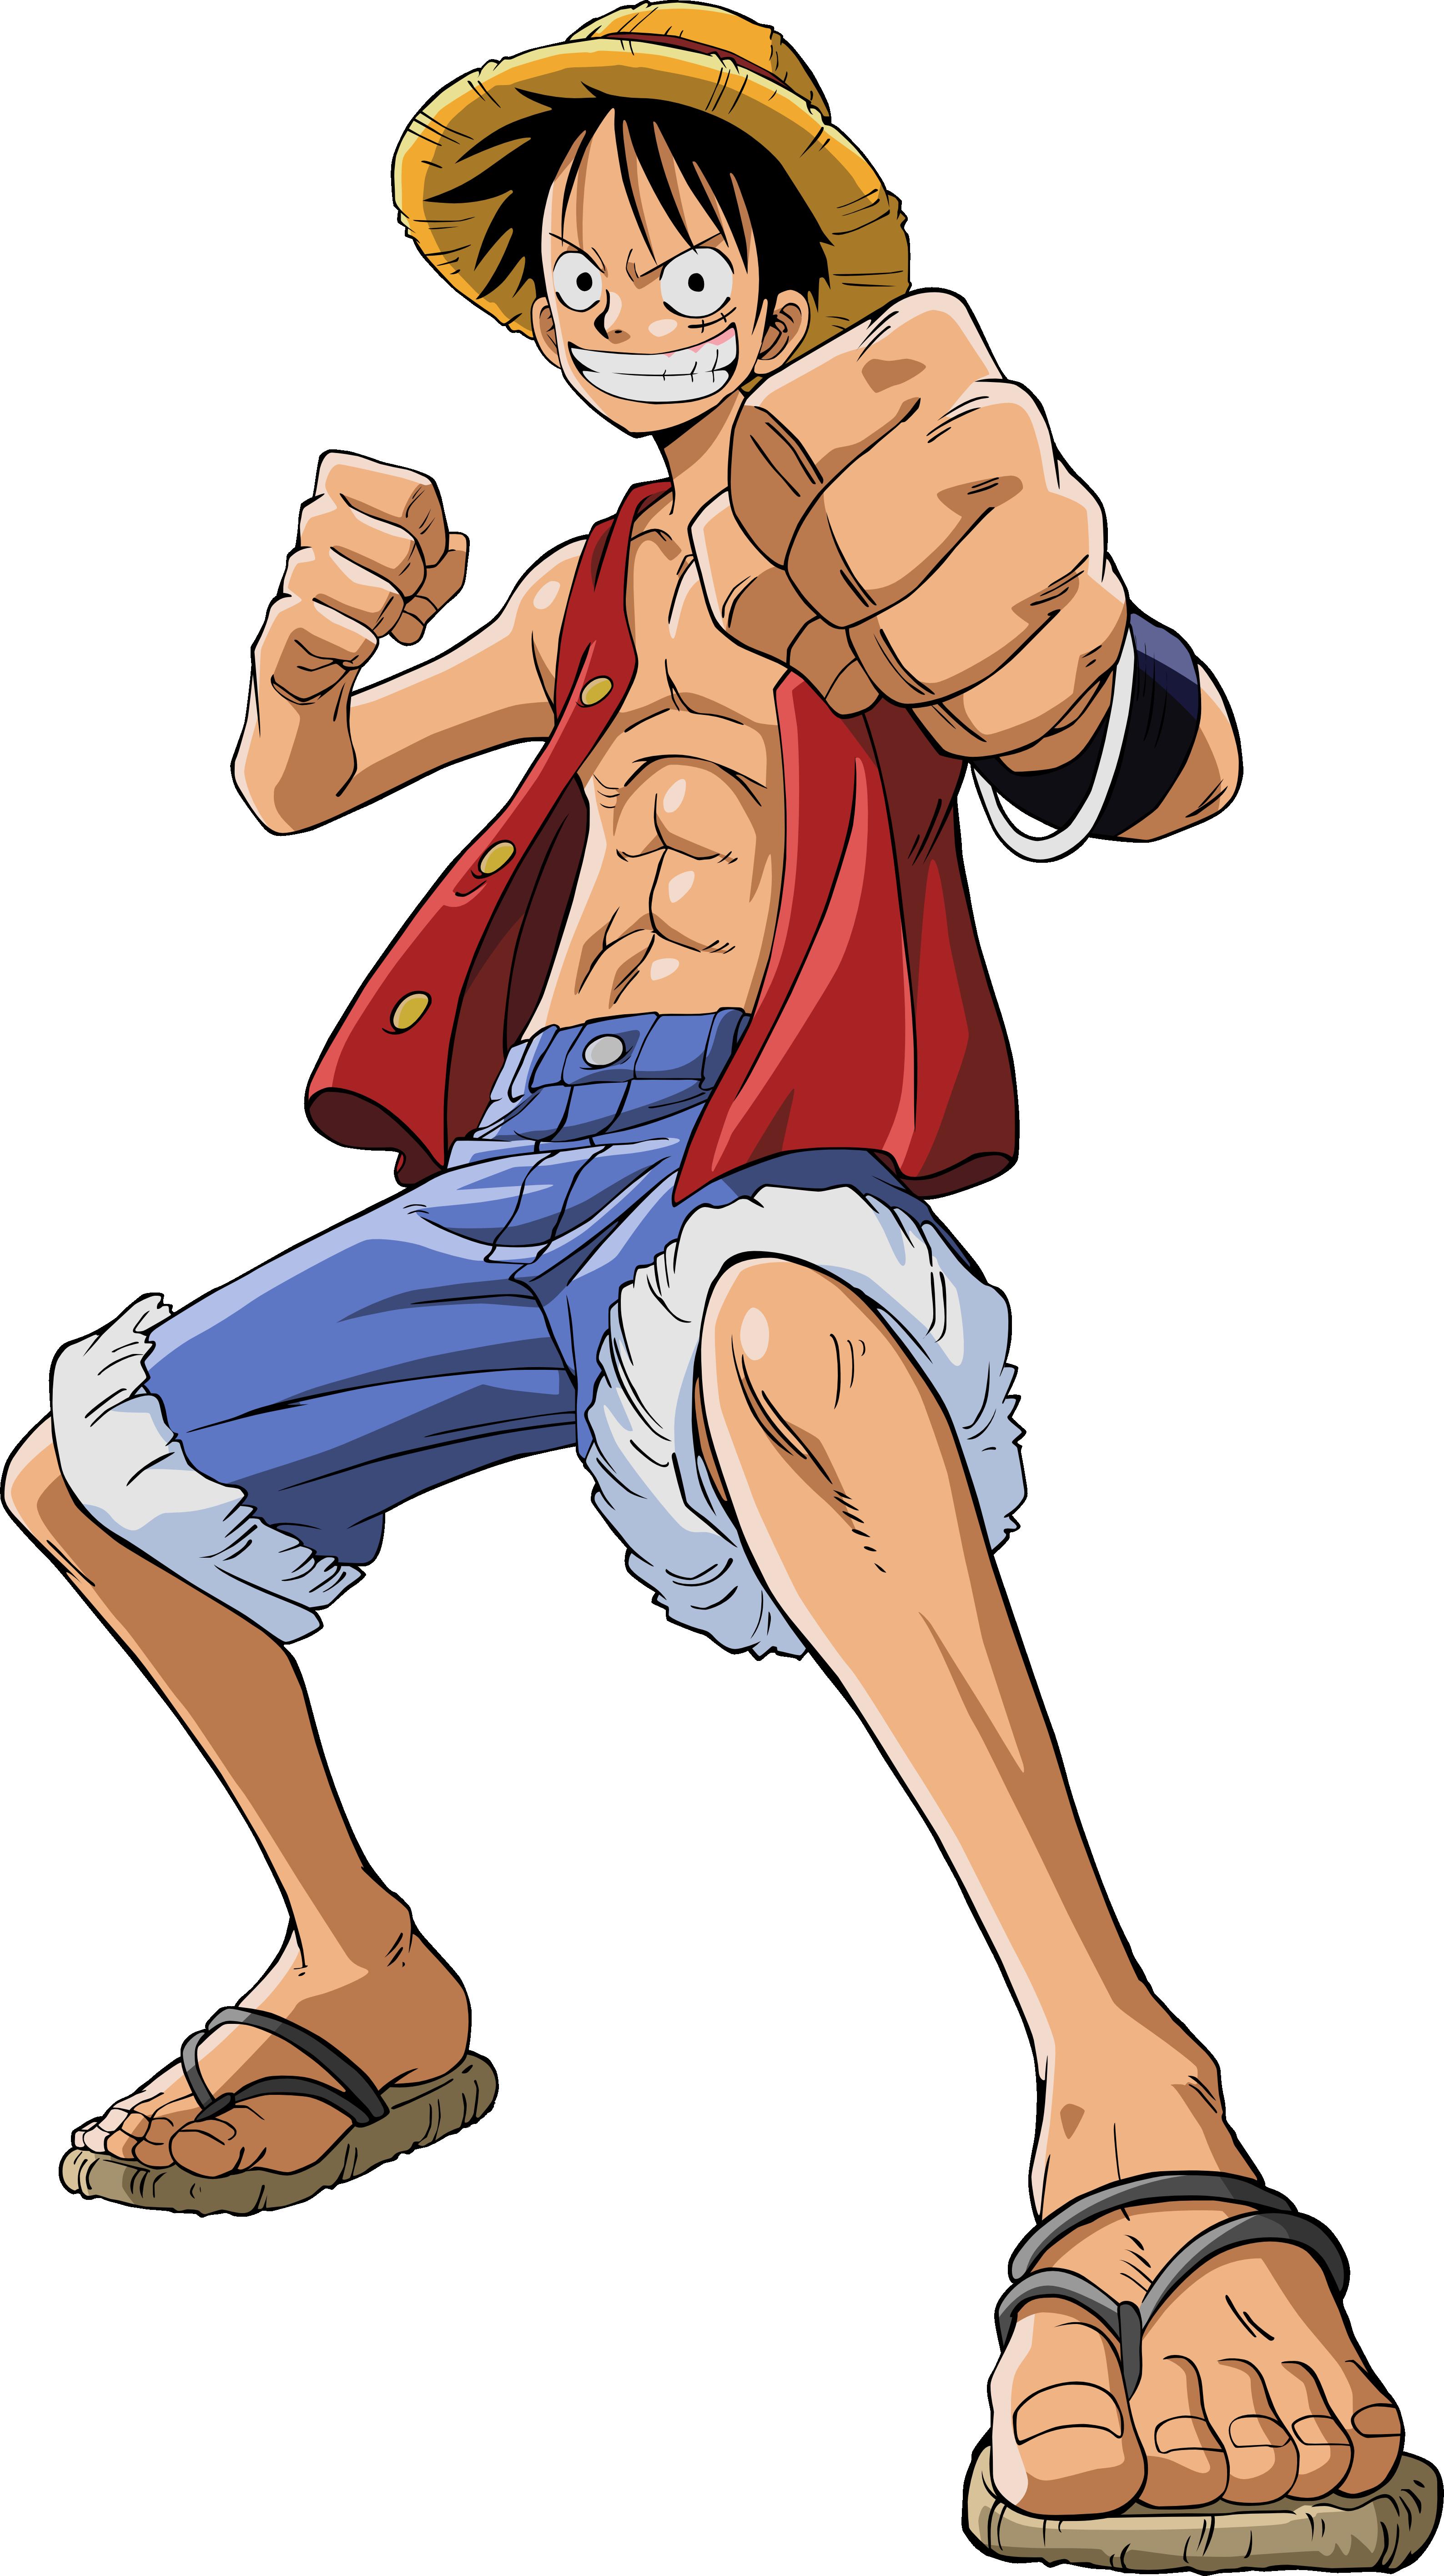 Anime One Piece Character Monkey D Luffy PNG Download